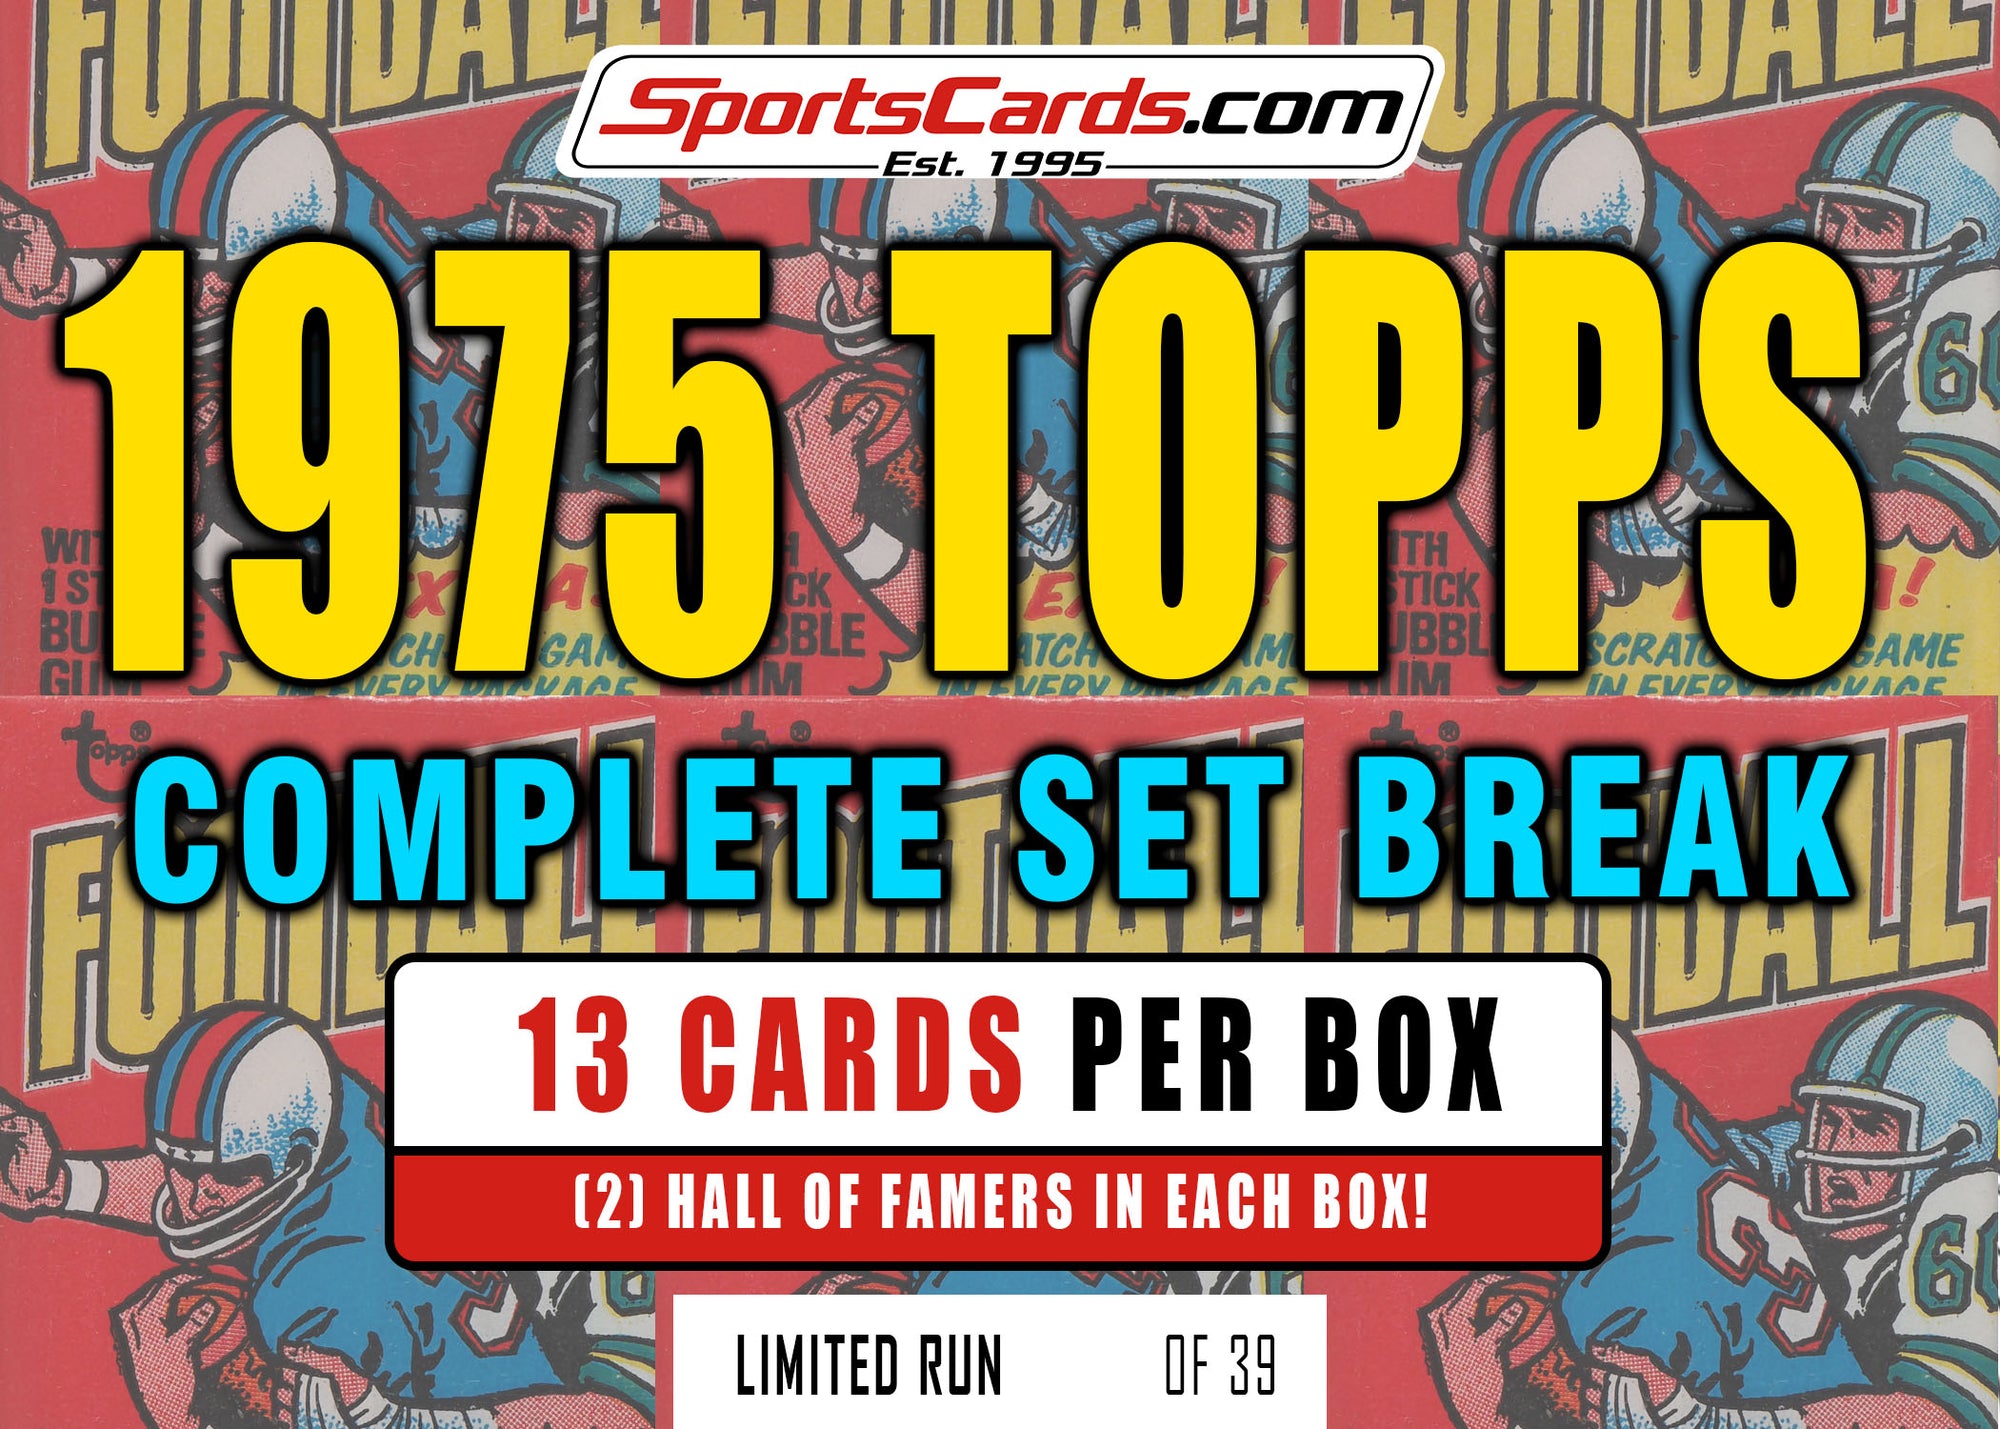 1975 TOPPS FOOTBALL COMPLETE SET BREAK – 13 CARDS PER BOX! Includes 2 HOFers!